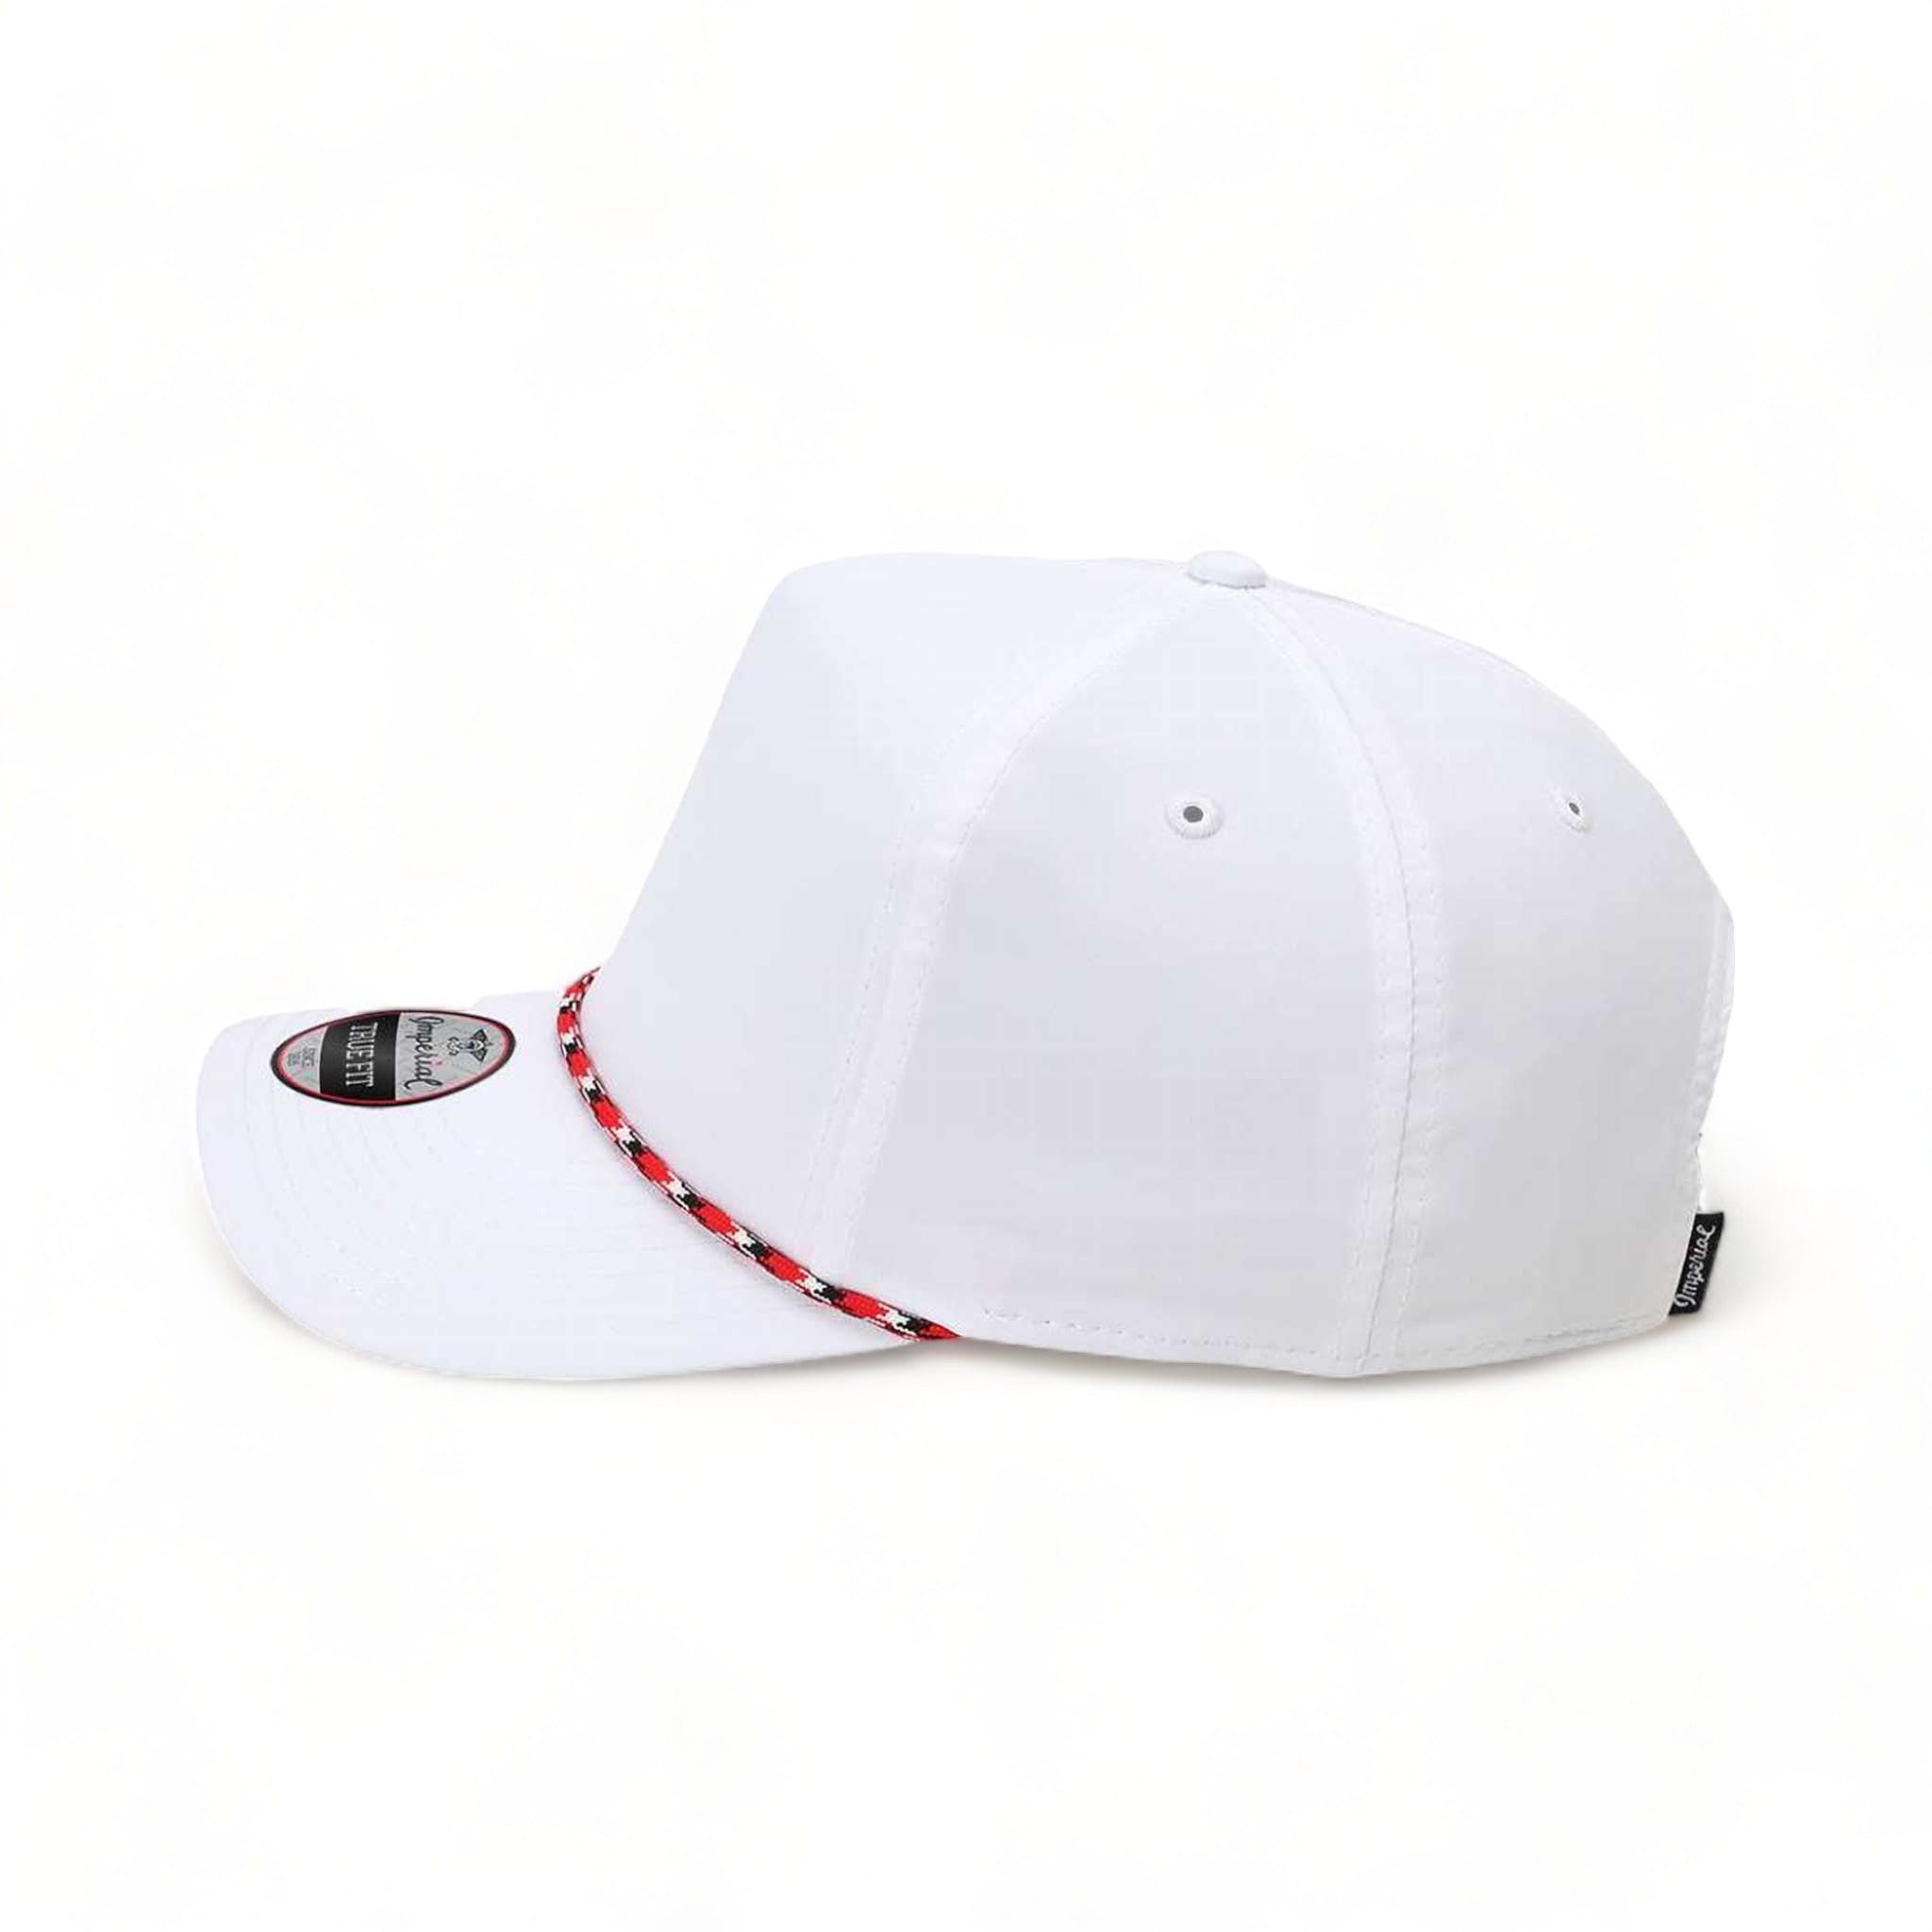 Side view of Imperial 5054 custom hat in white and red-black